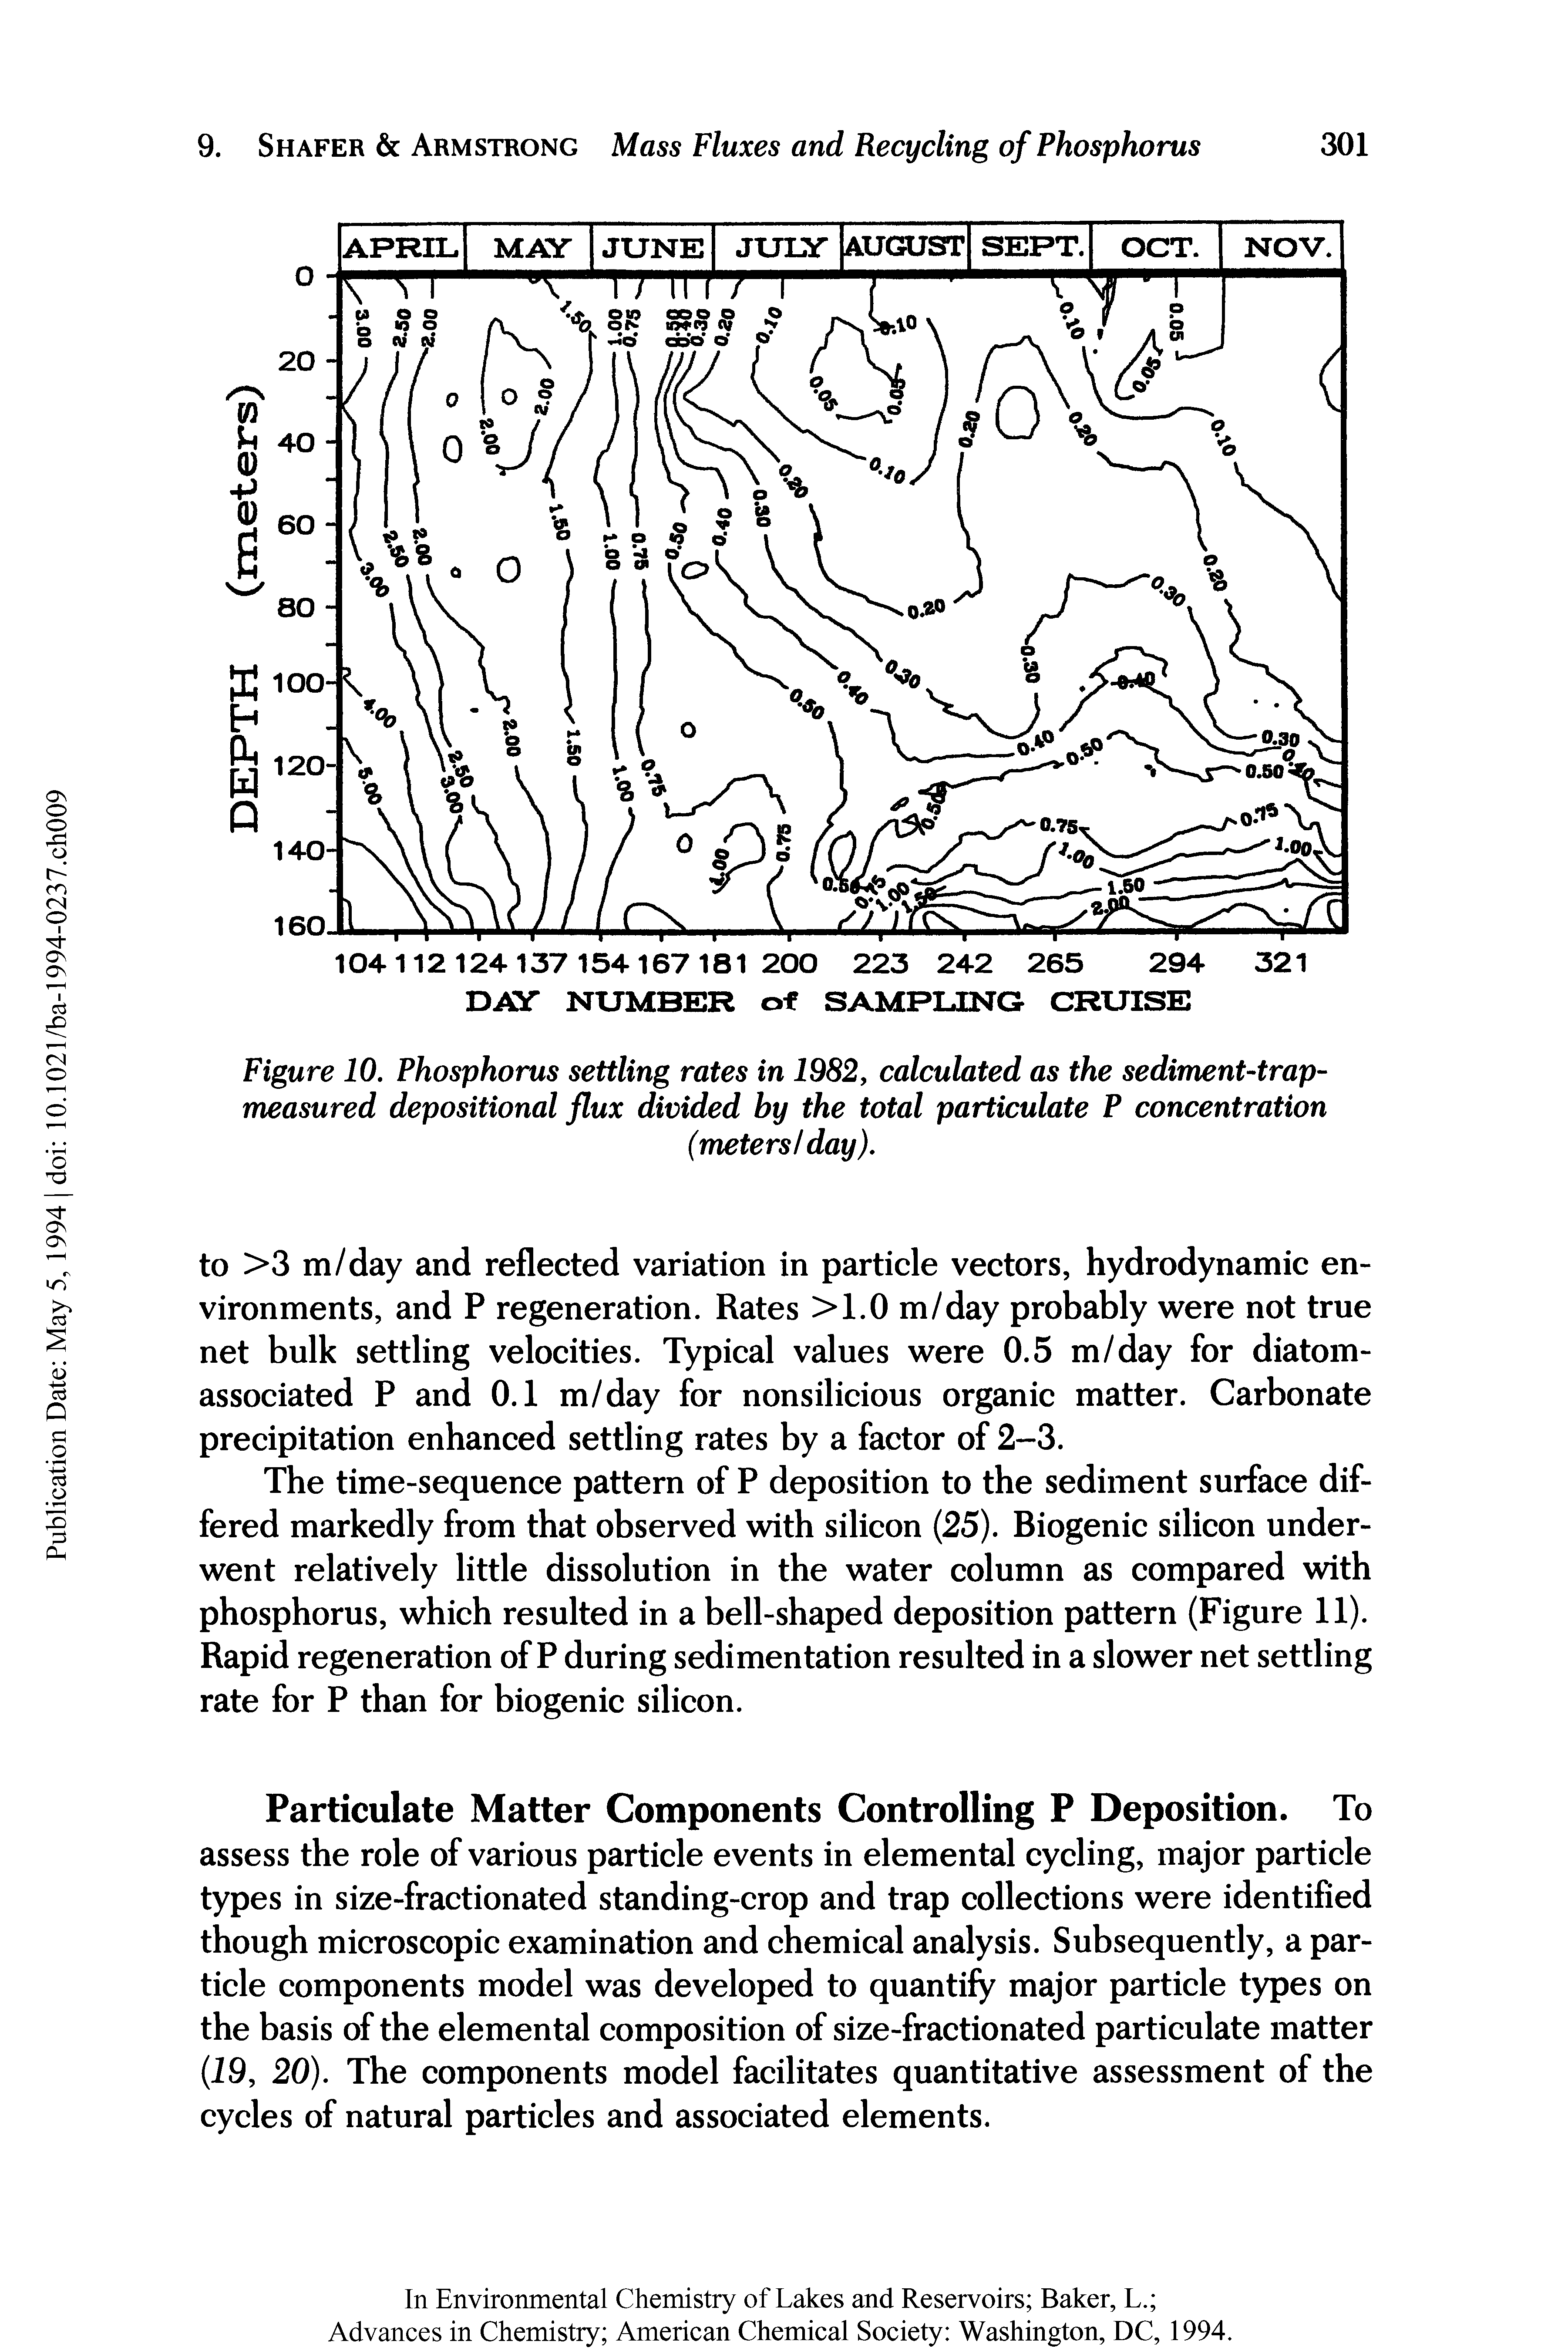 Figure 10. Phosphorus settling rates in 1982, calculated as the sediment-trap-measured depositional flux divided by the total particulate P concentration...